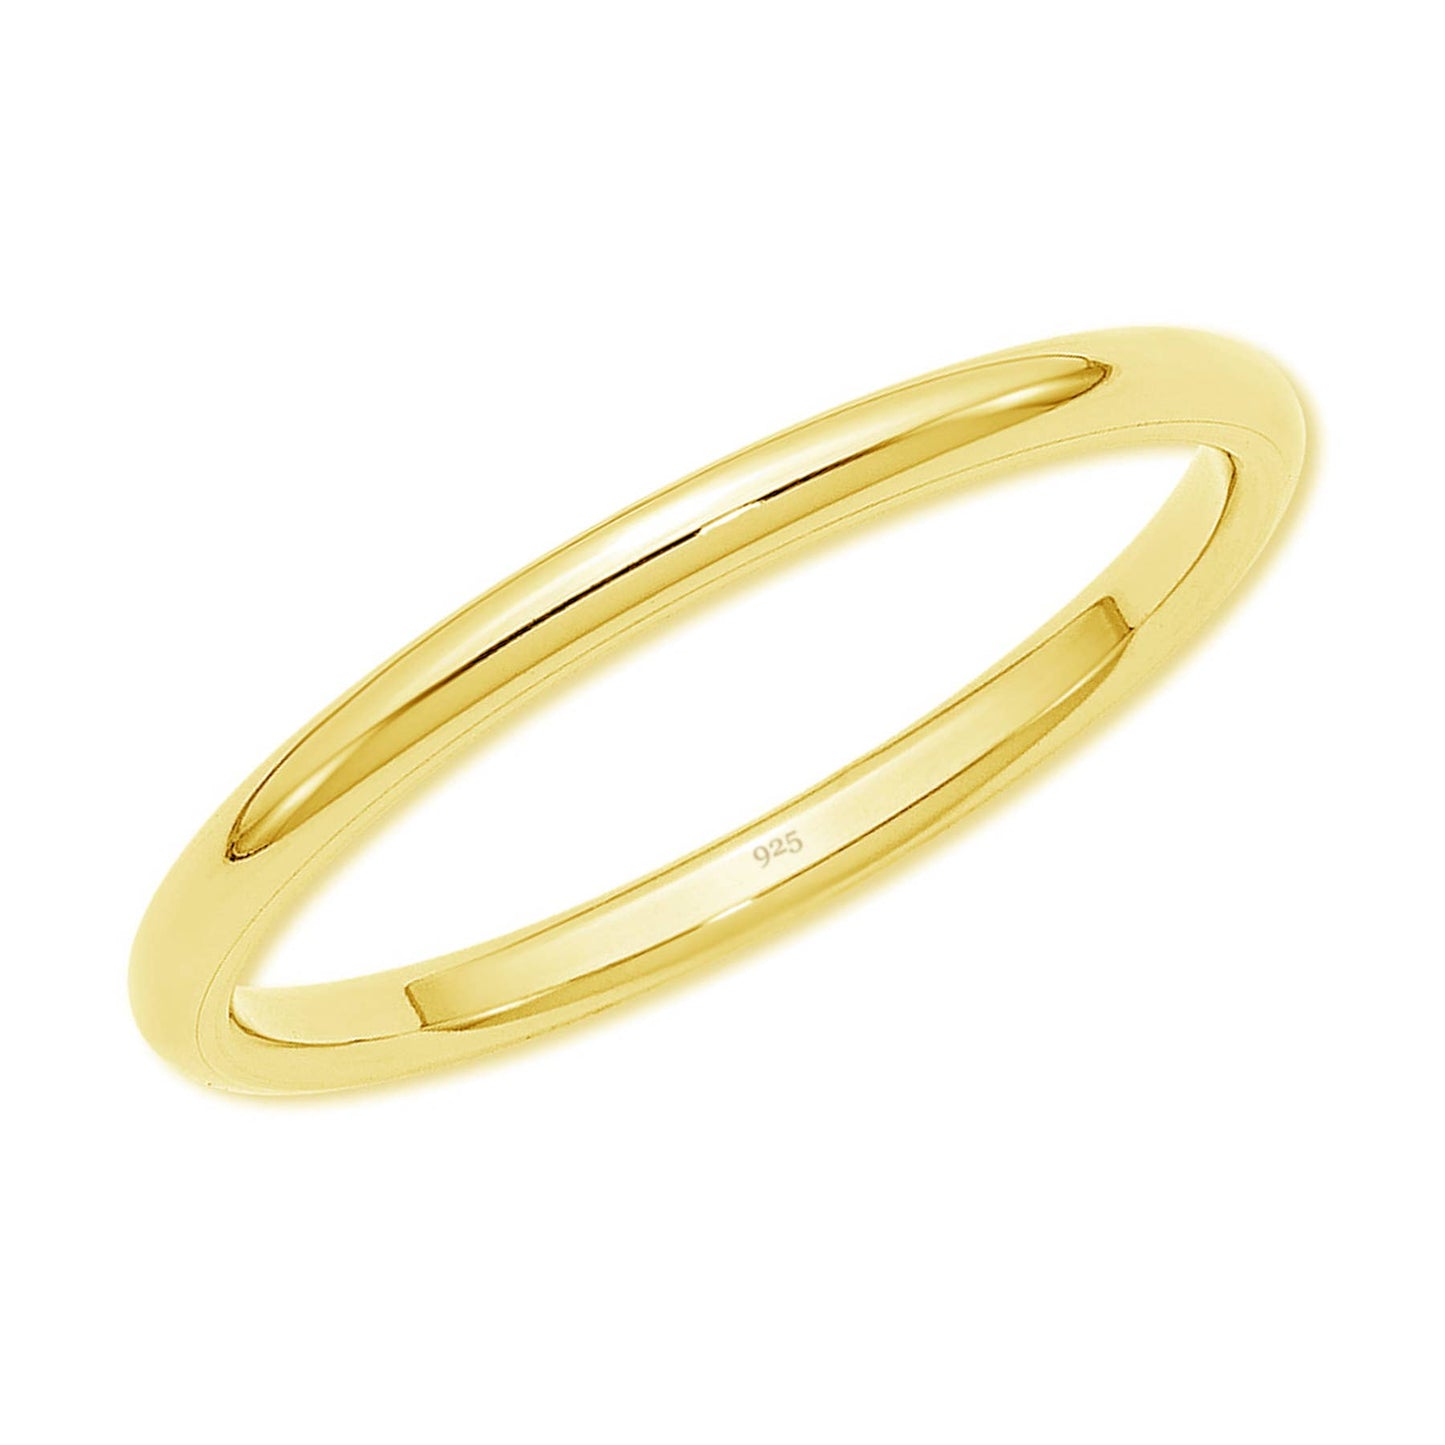 14K Gold-Plated Gold Band Baby Ring - 2mm Band